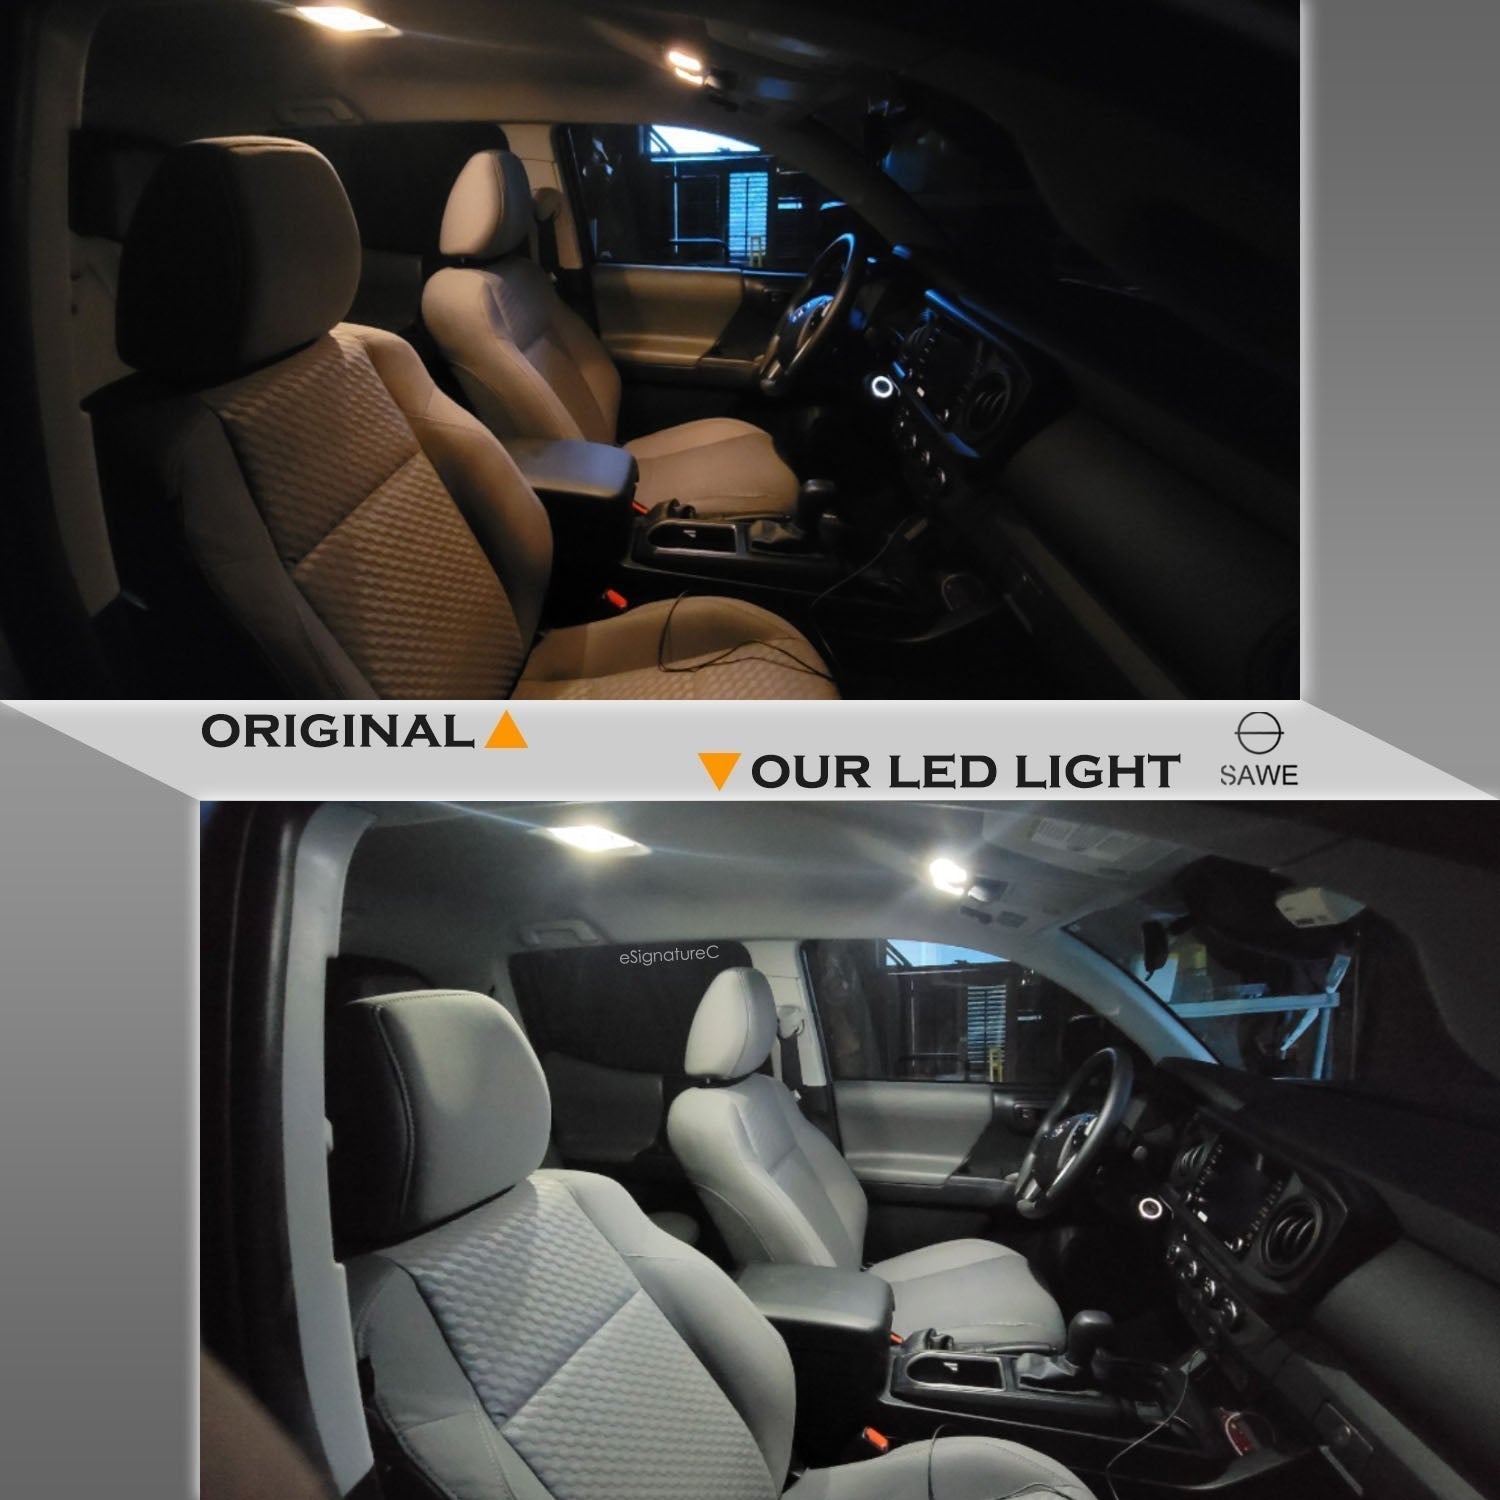 For Ford Focus Interior LED Lights - Dome & Map Light Bulbs Package Kit for 2012 - 2018 - White